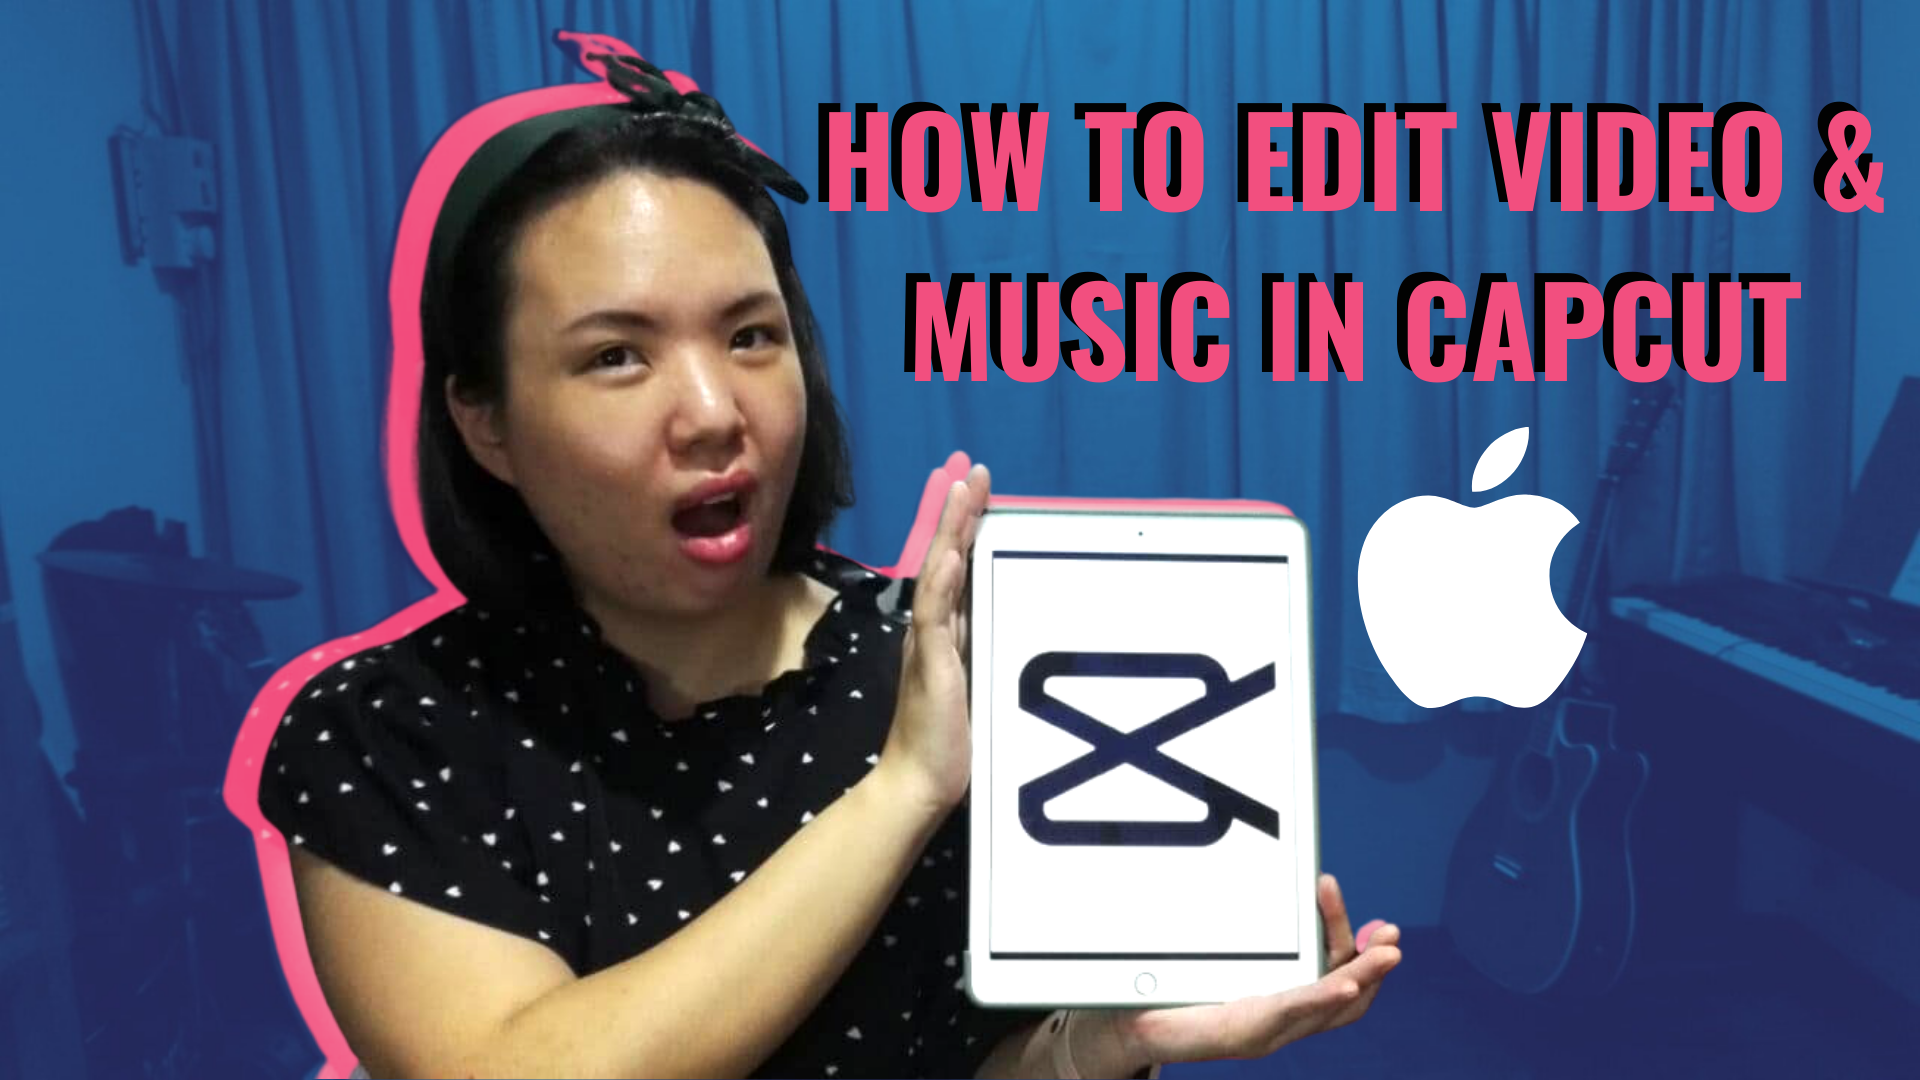 how to edit video and music in capcut for iOS users